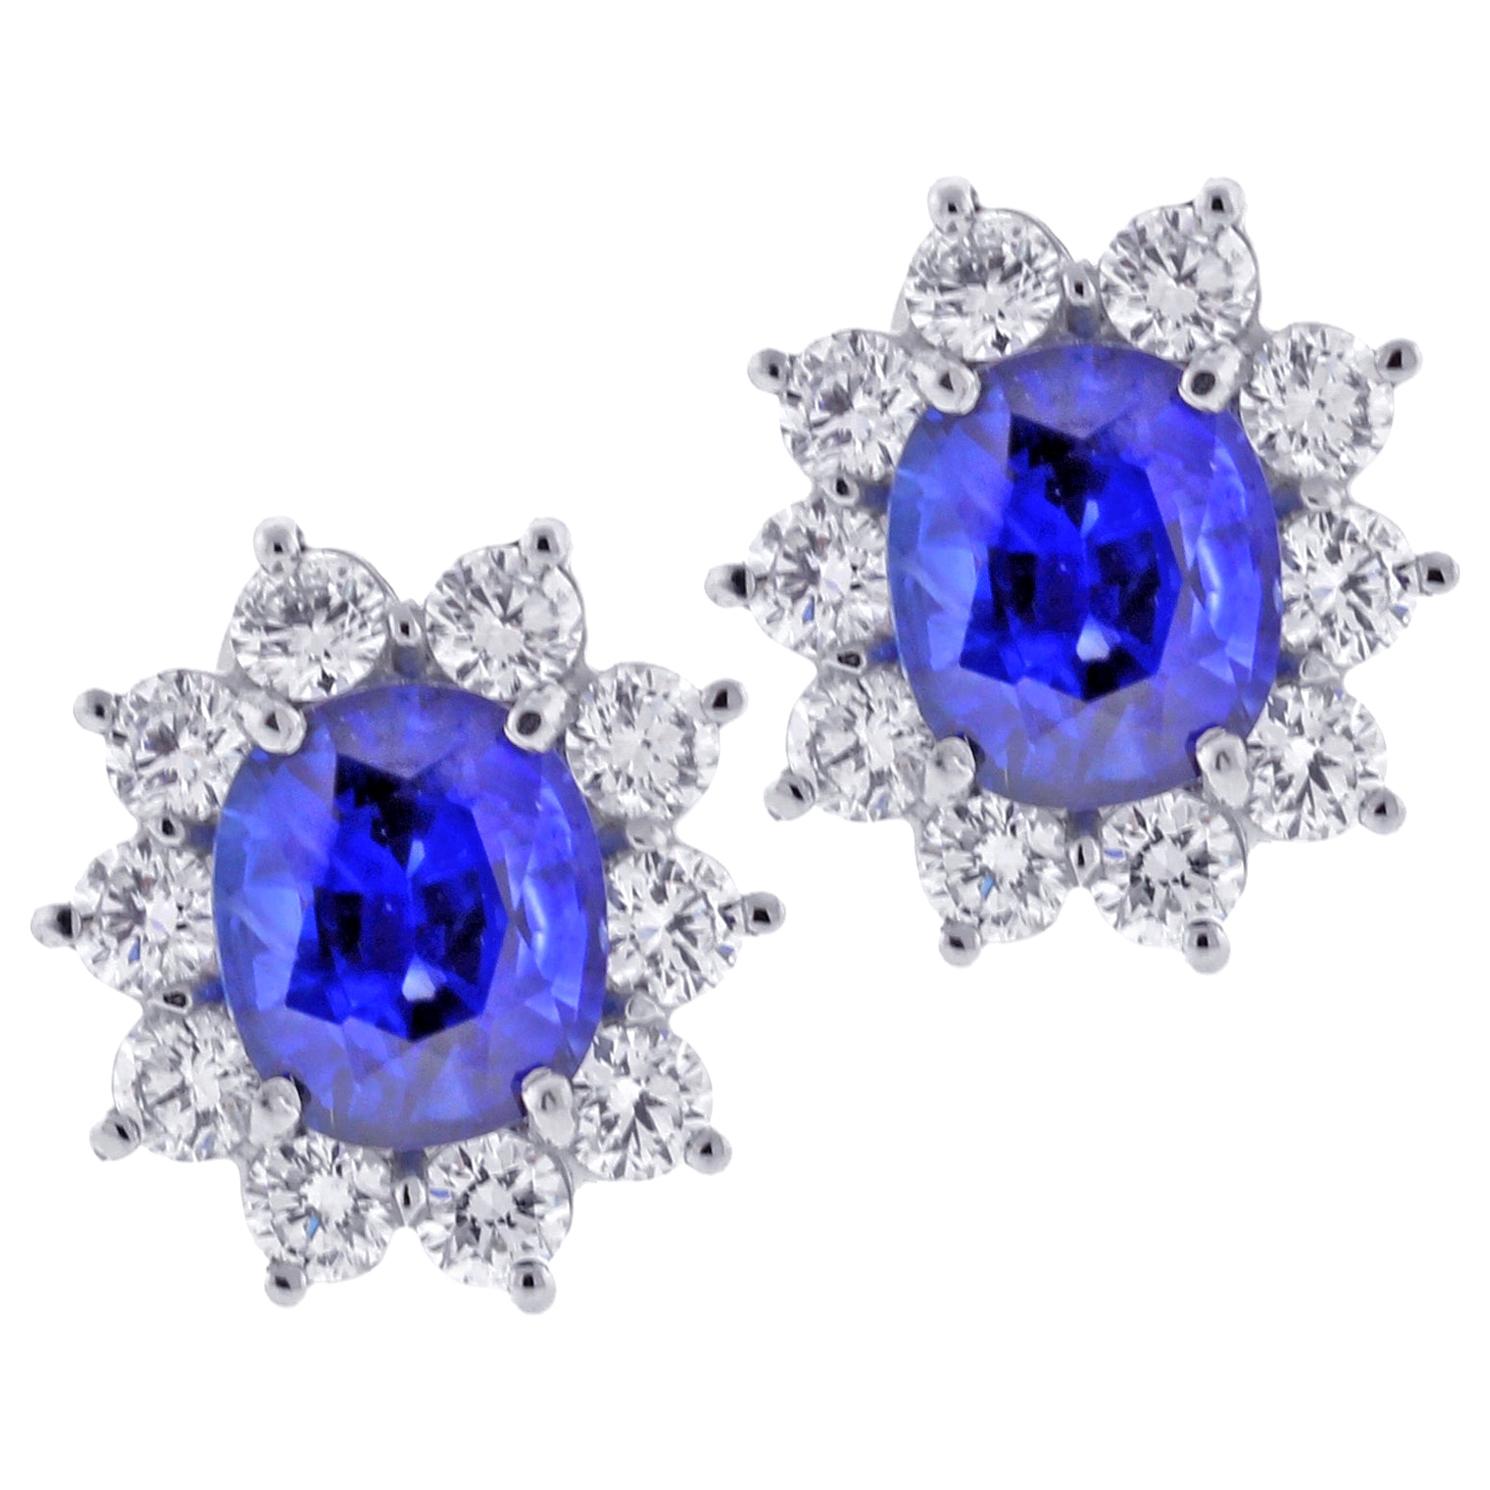 Sapphire and Diamond Earrings from Pampillonia